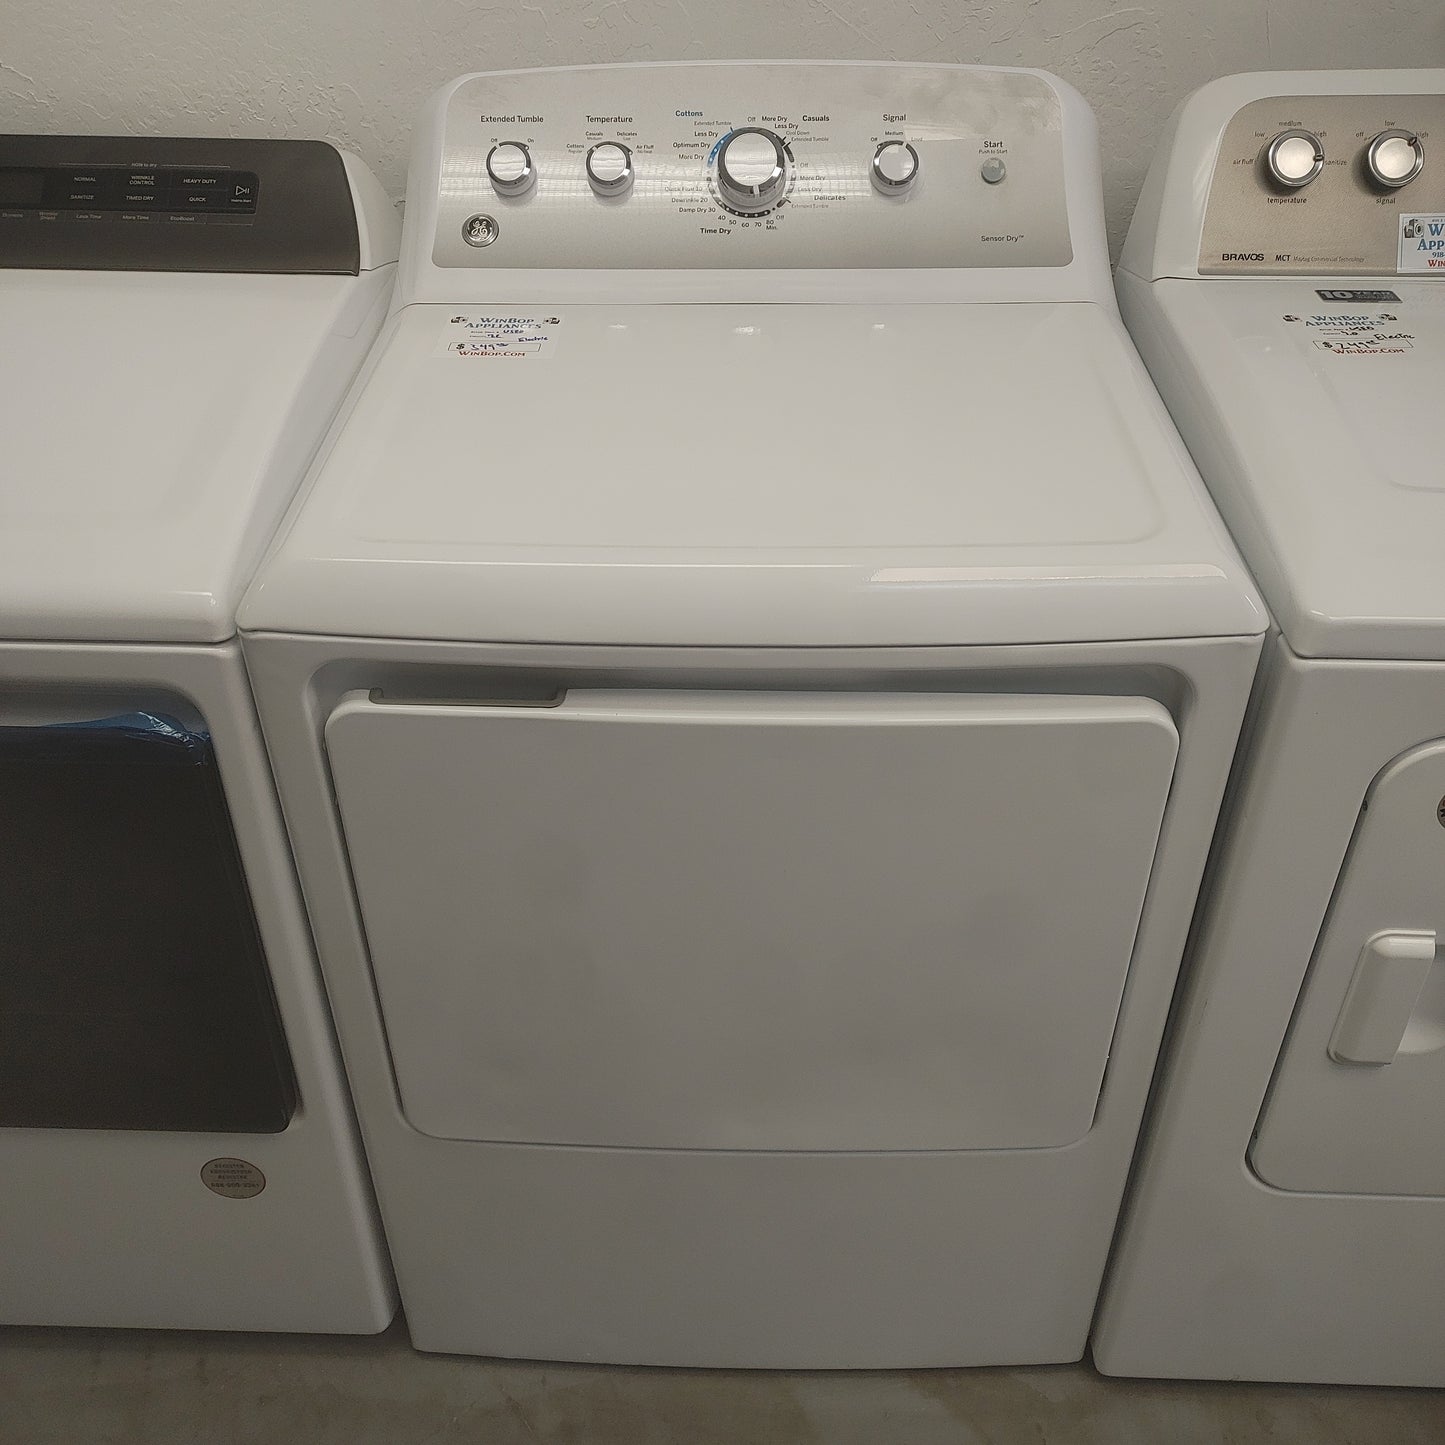 Used GE 7.2 cubic ft Electric Dryer